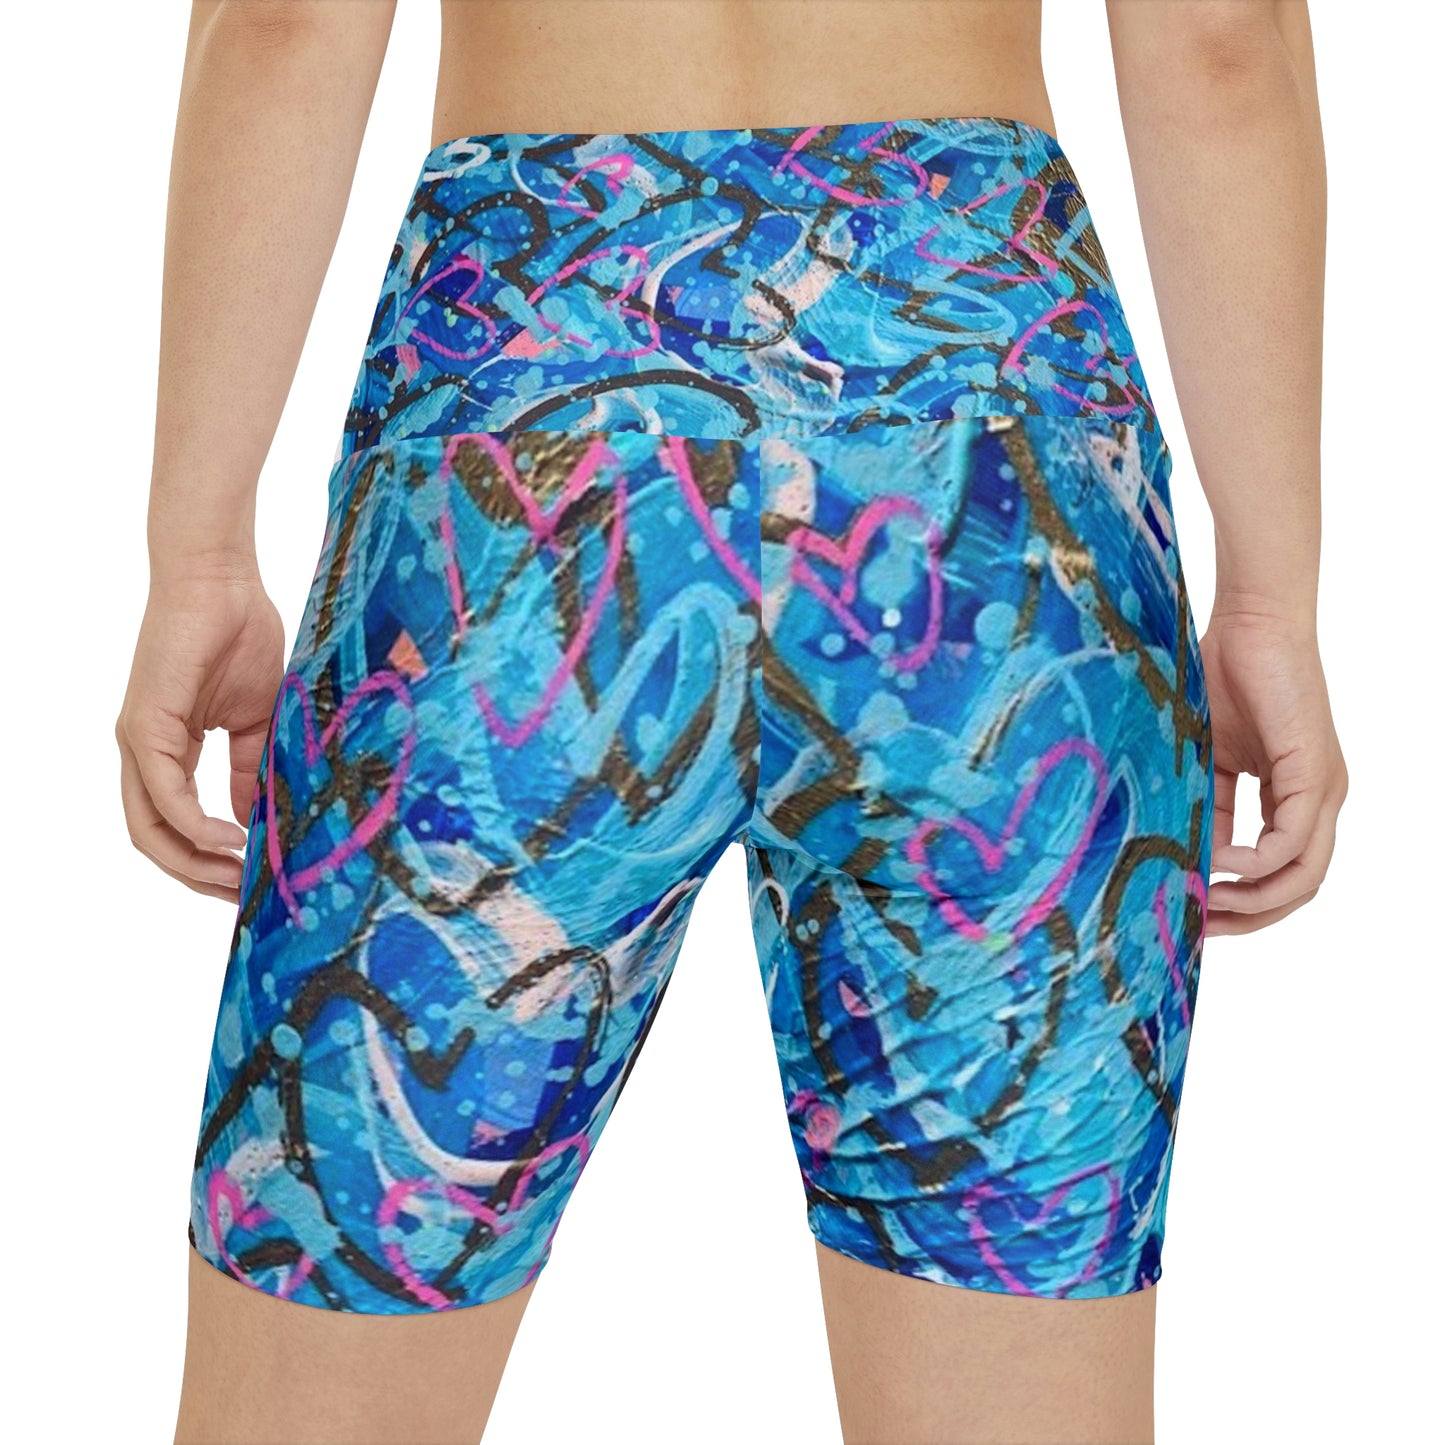 "Full Of Love" Women's Workout Shorts